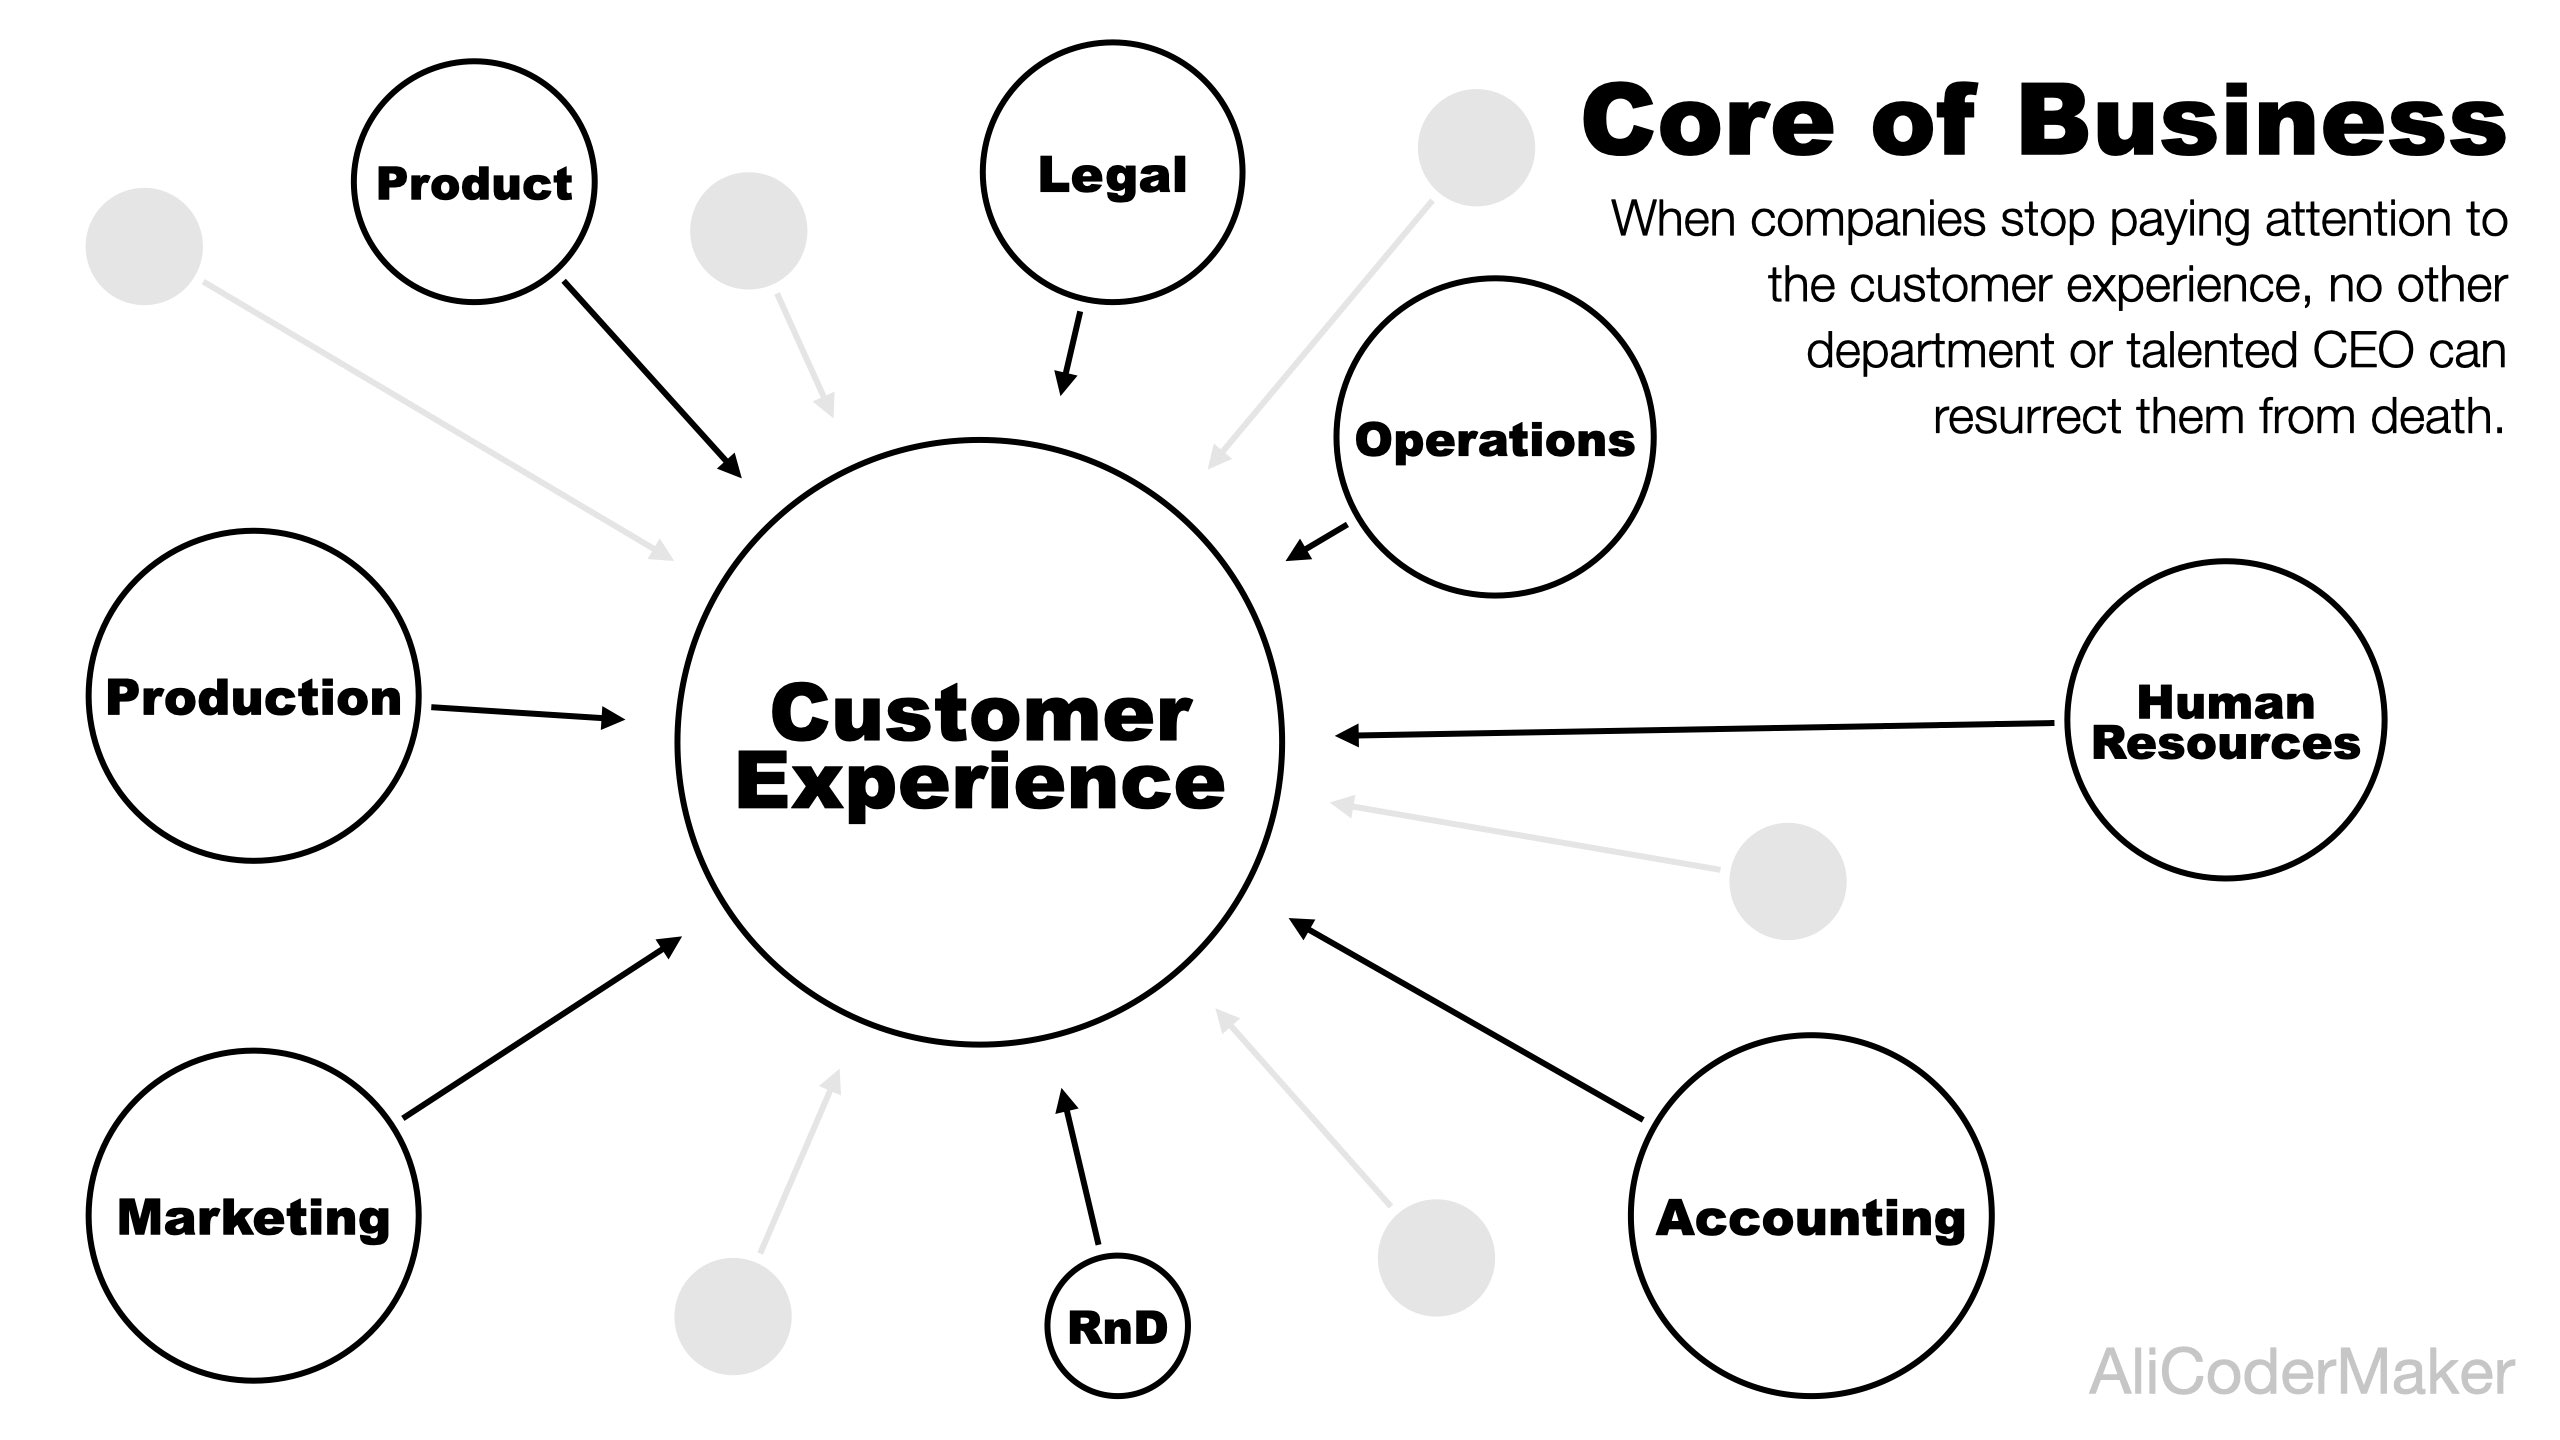 how business create value. core of business is customer experience